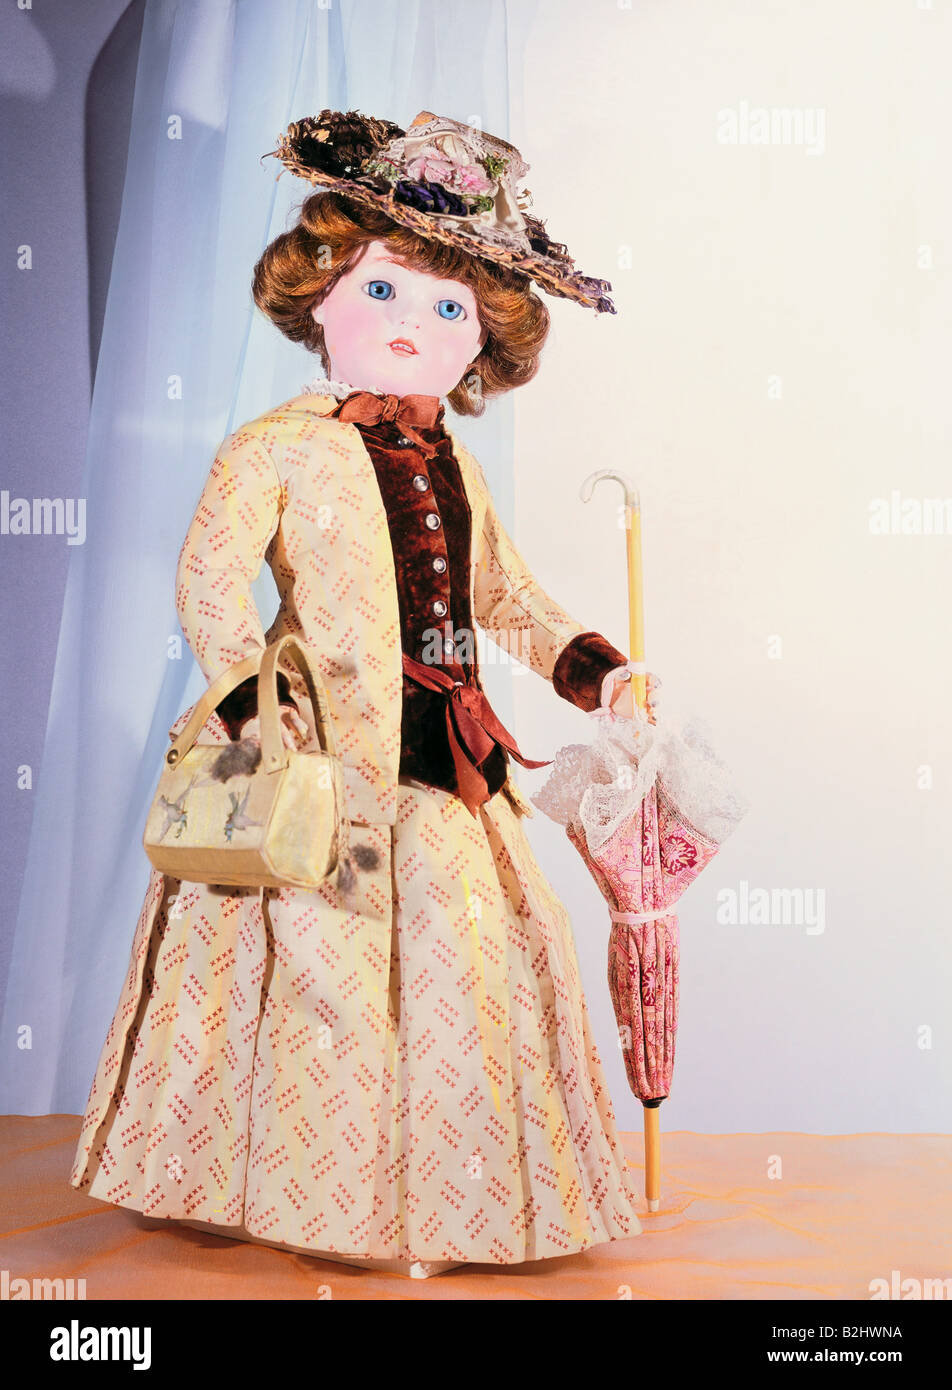 toys, dolls, 'Gliederpuppe mit Sonnenschirm' (Jointed doll with parasol), bisque porcelain, real hair, paper-mache, clothes, height 54 cm, Waltershausen, Germany, circa 1910, Munich City Museum, Stock Photo